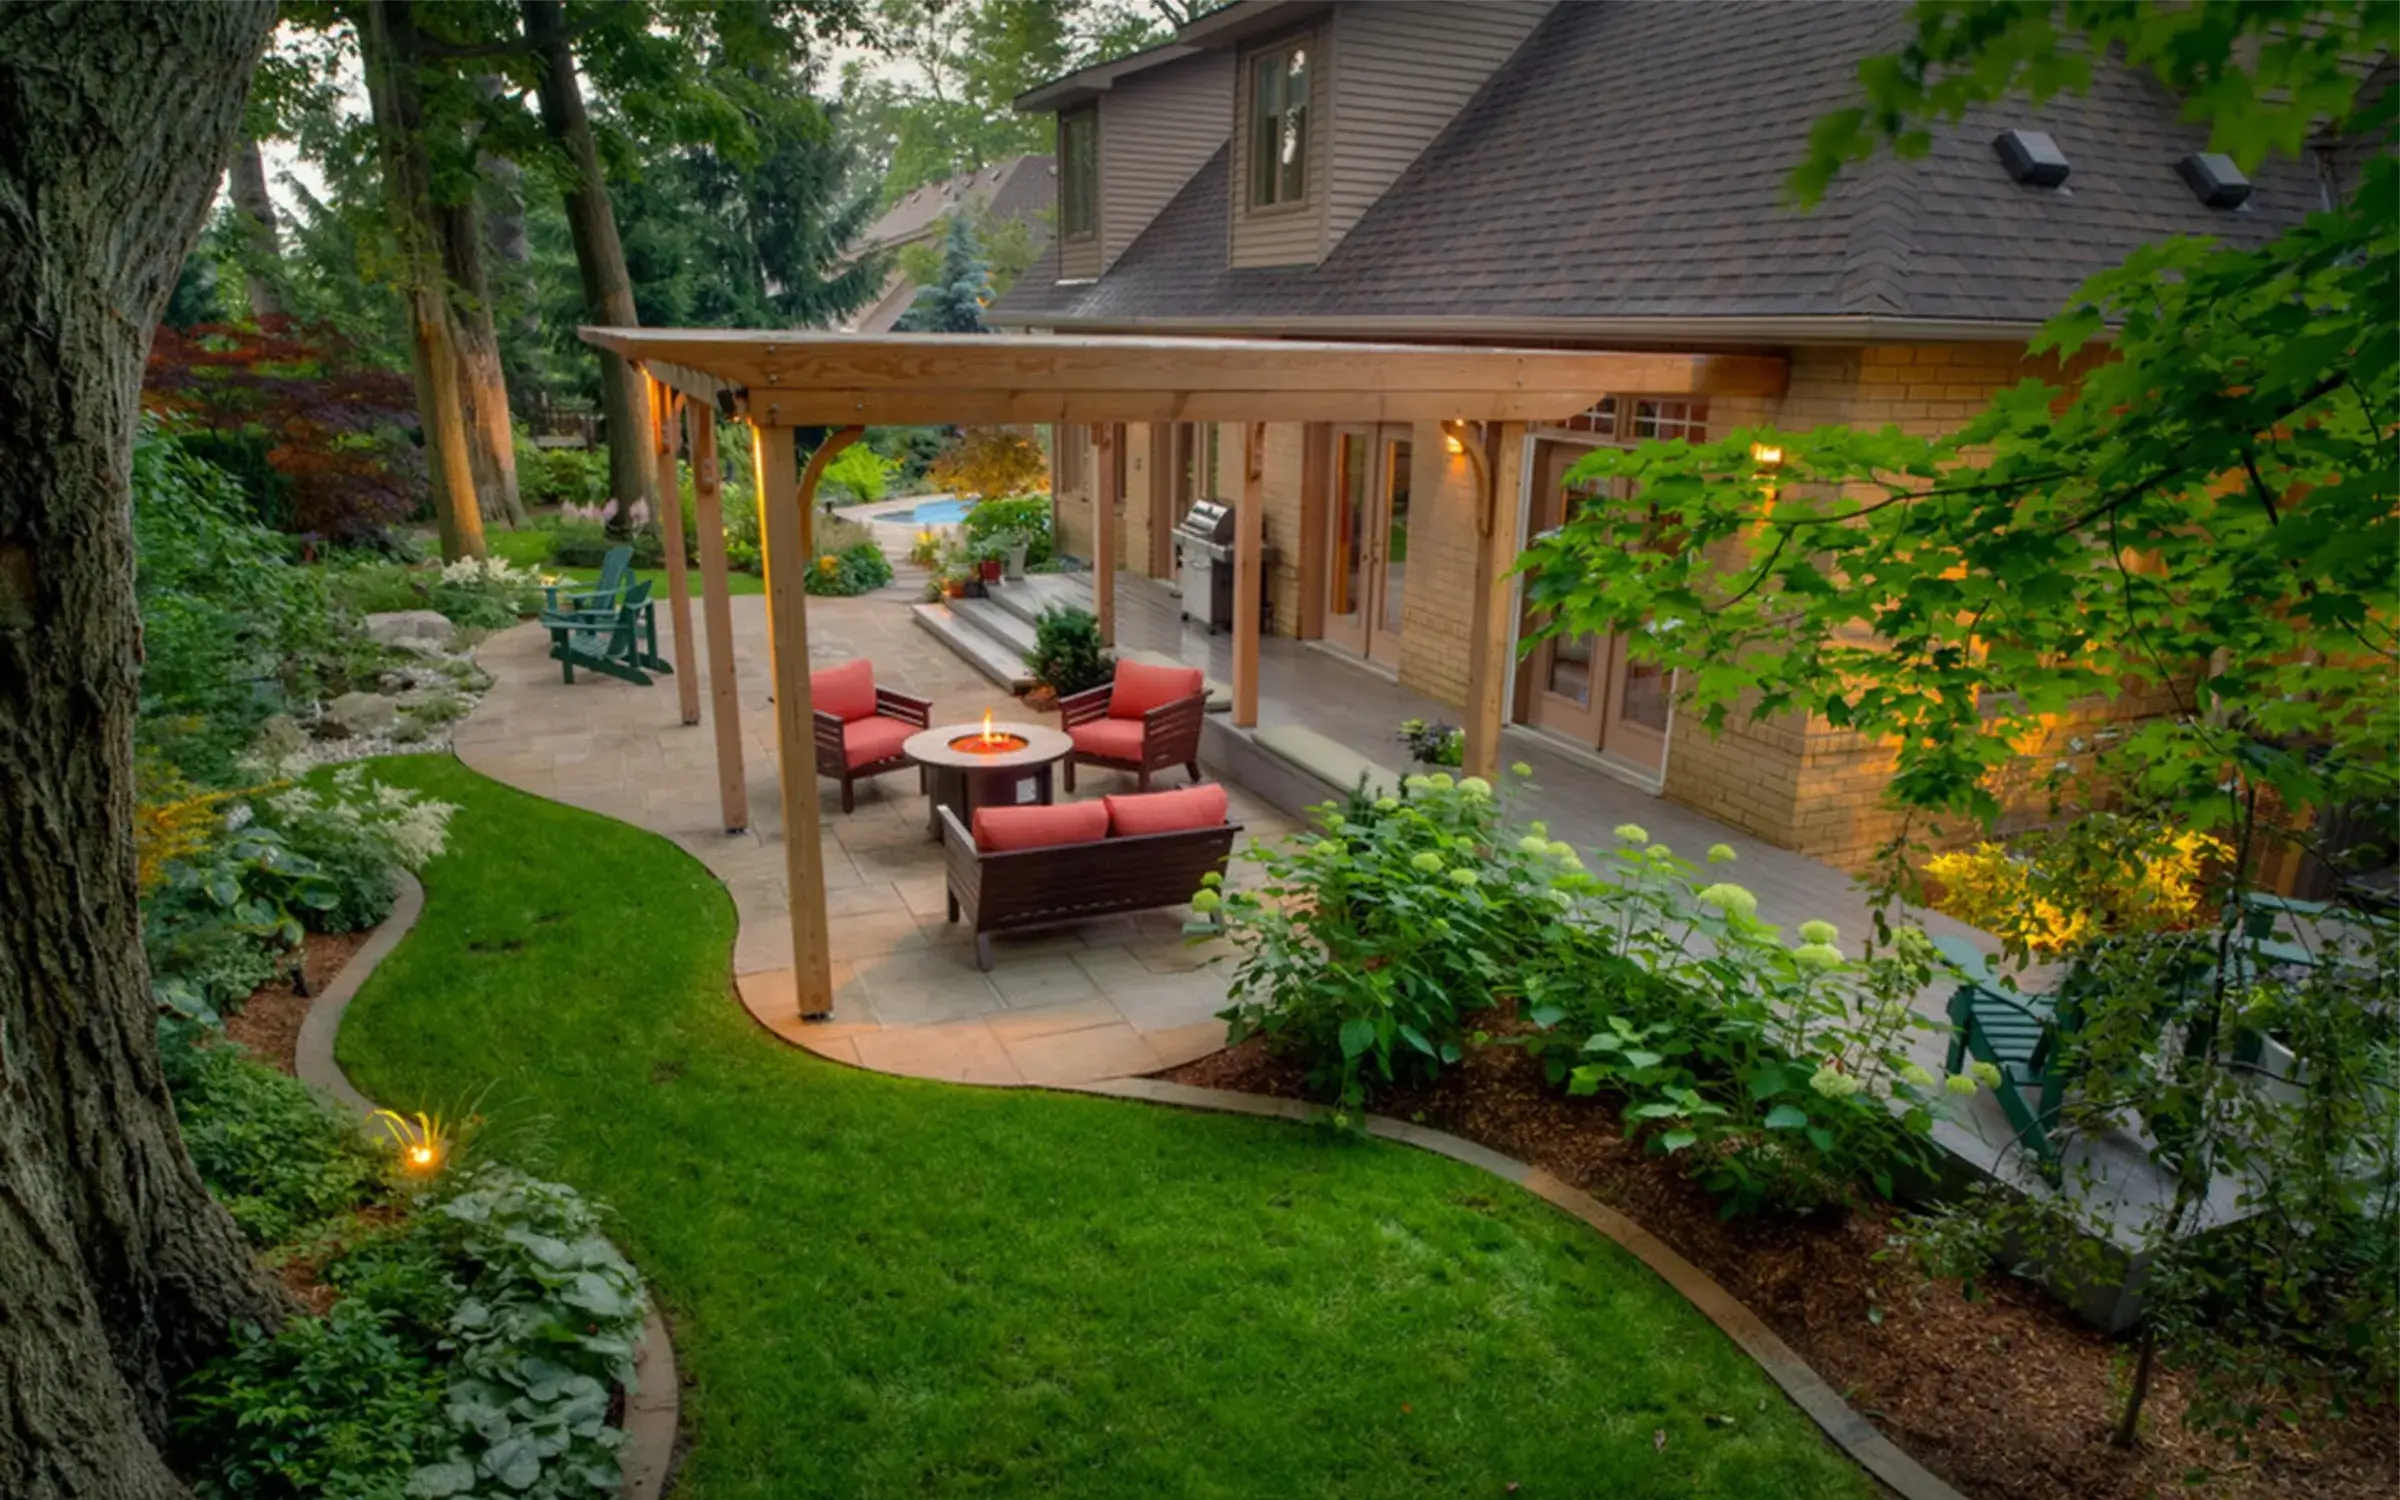  Backyard Landscaping Ideas to Transform Your Outdoor Space